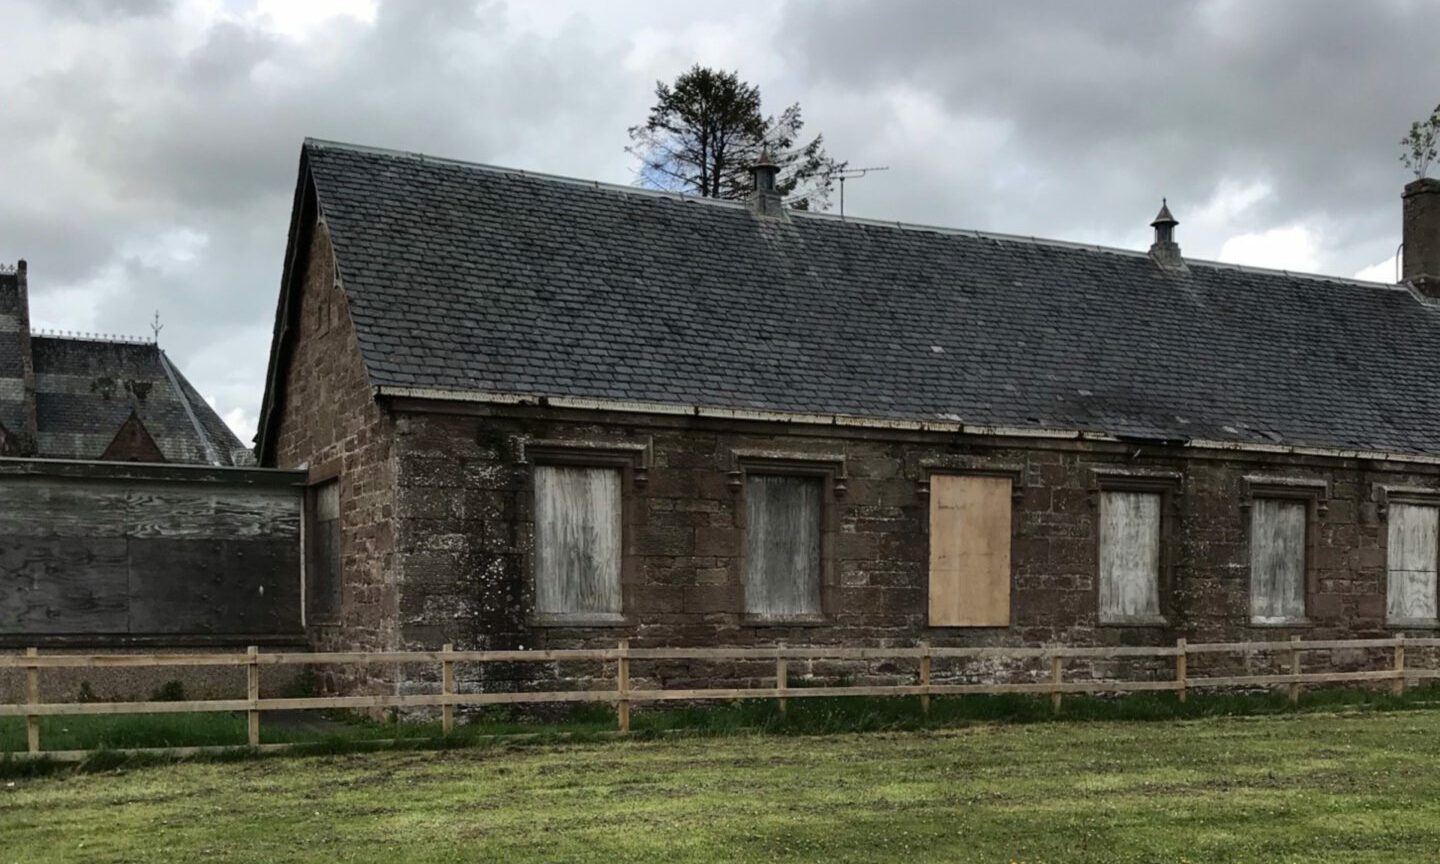 Ardler School in Perthshire has been empty since 1983 but will now be transformed into a three-bedroom house.